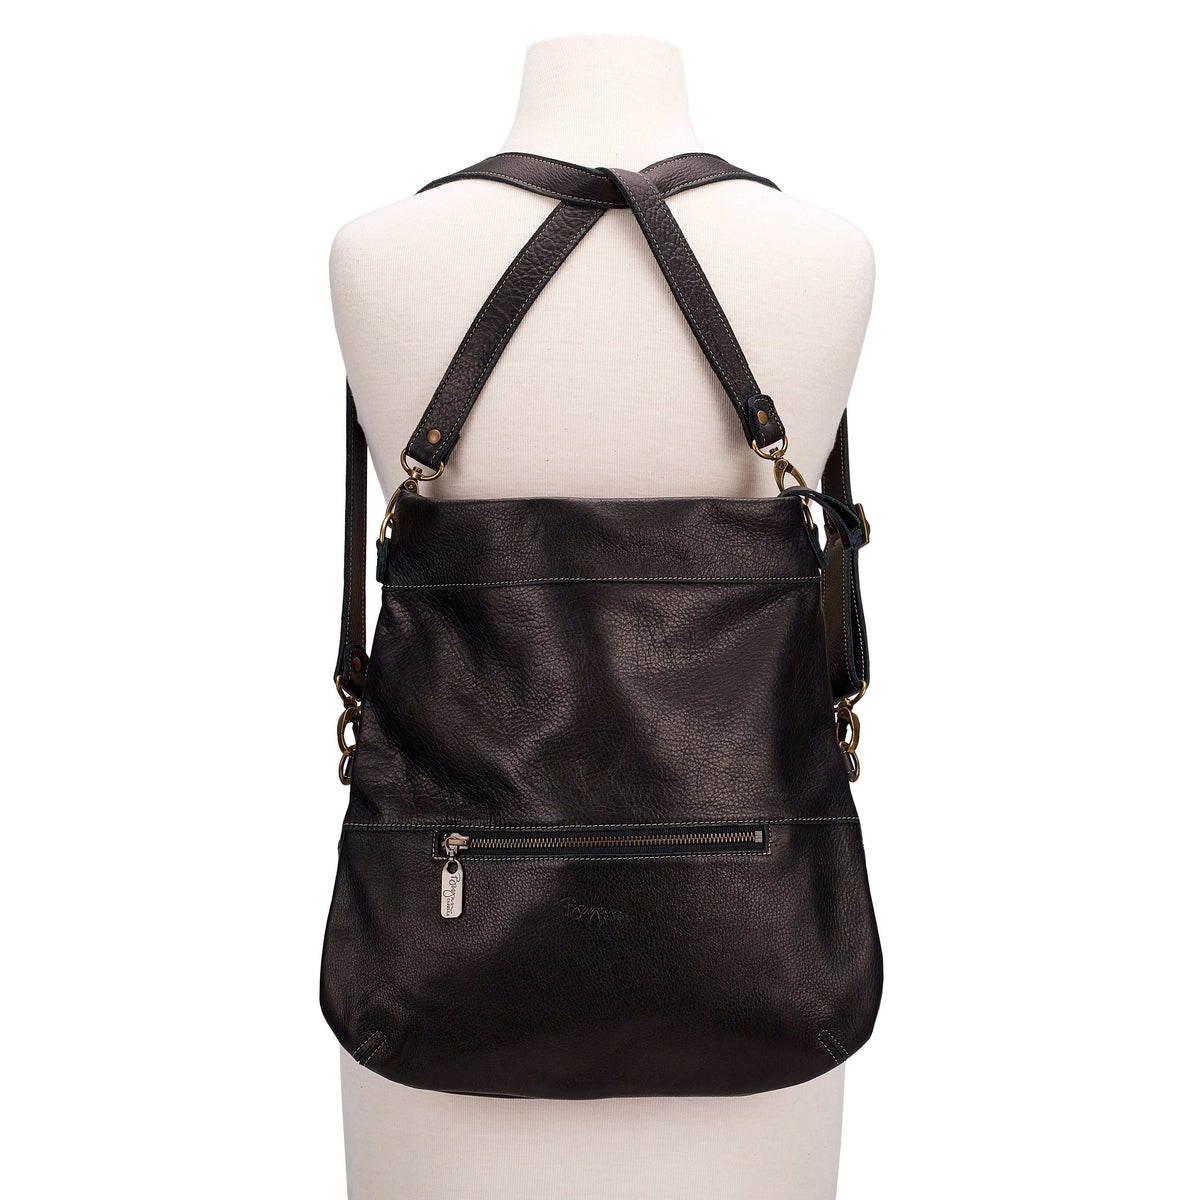 Leather Convertible Backpack Handbag, Best & USA Made